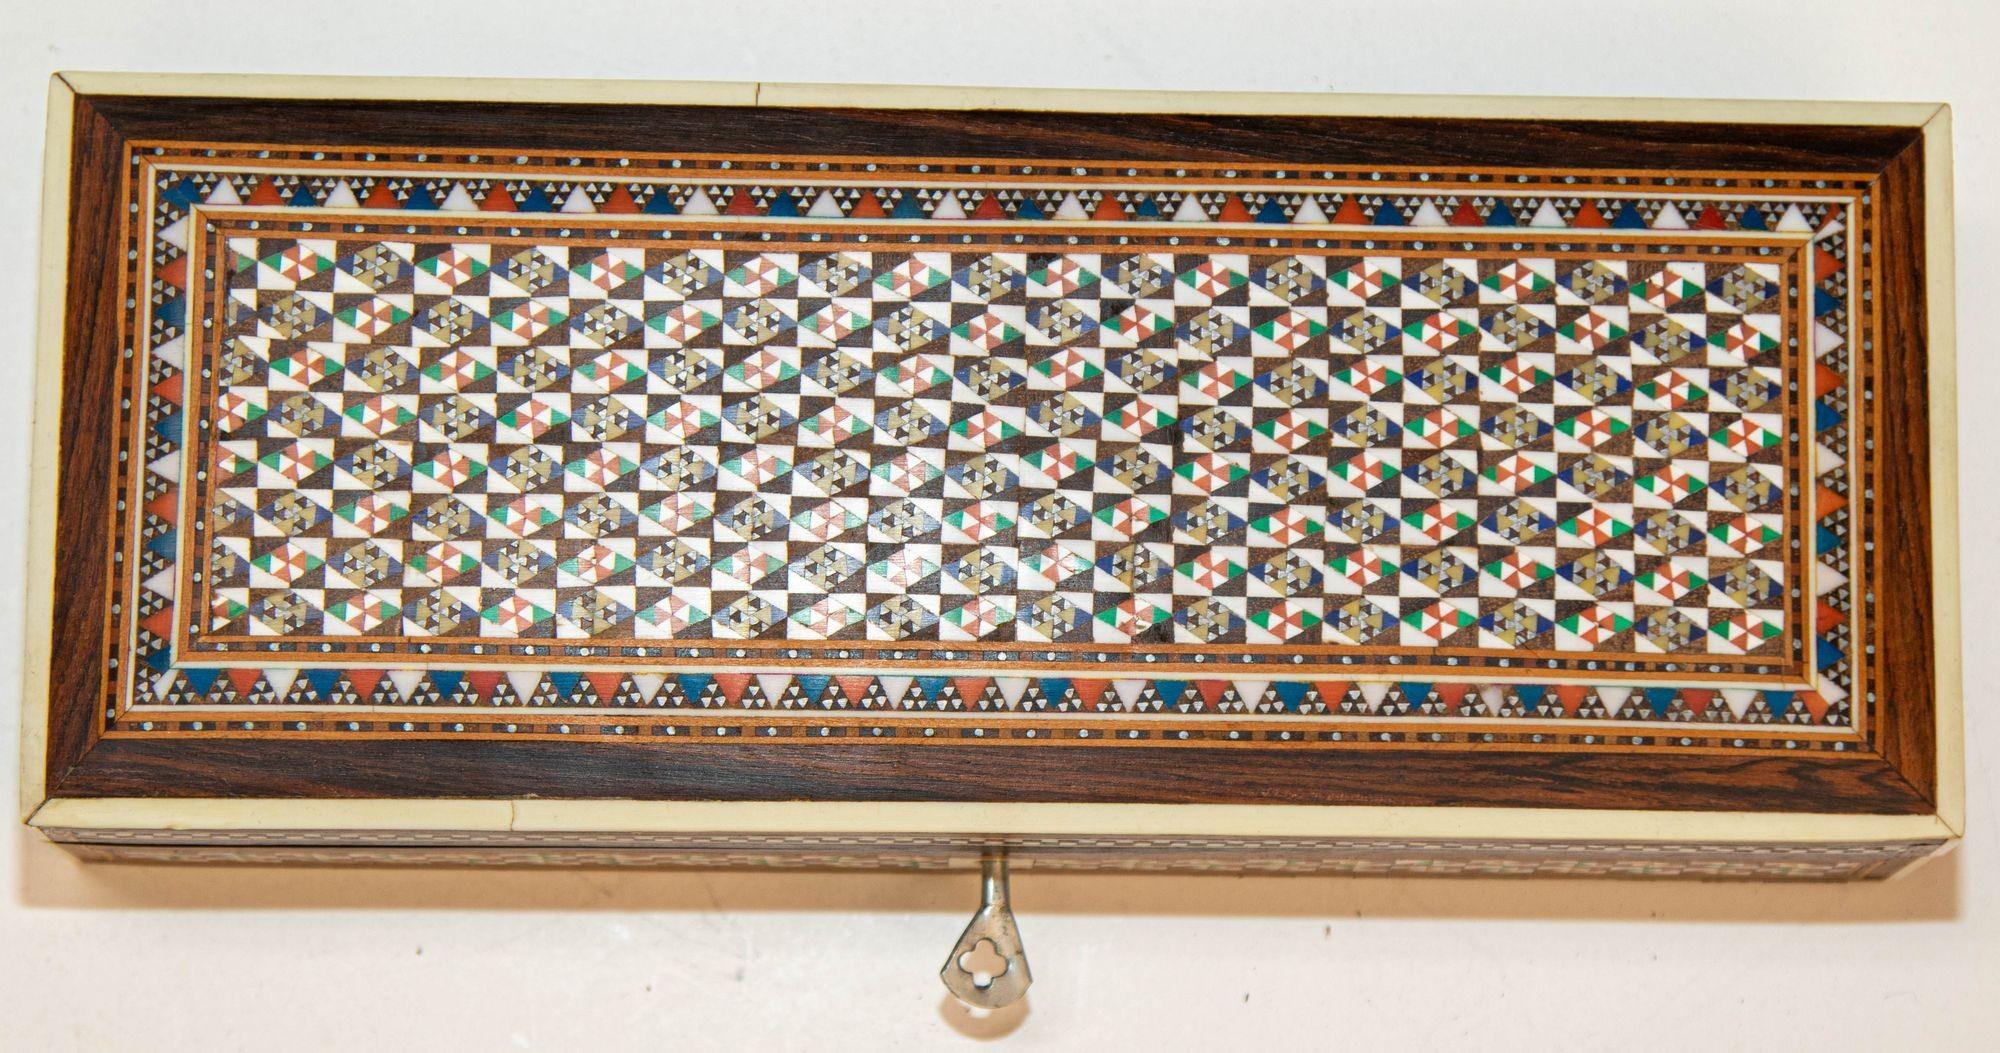 1940s Fine Handcrafted Syrian Mother-of-Pearl Inlay Box.
Exquisite handcrafted Middle Eastern mosaic marquetry inlaid walnut wood box.
Large box intricately decorated with Moorish motif designs which have been painstakingly inlaid with mosaic